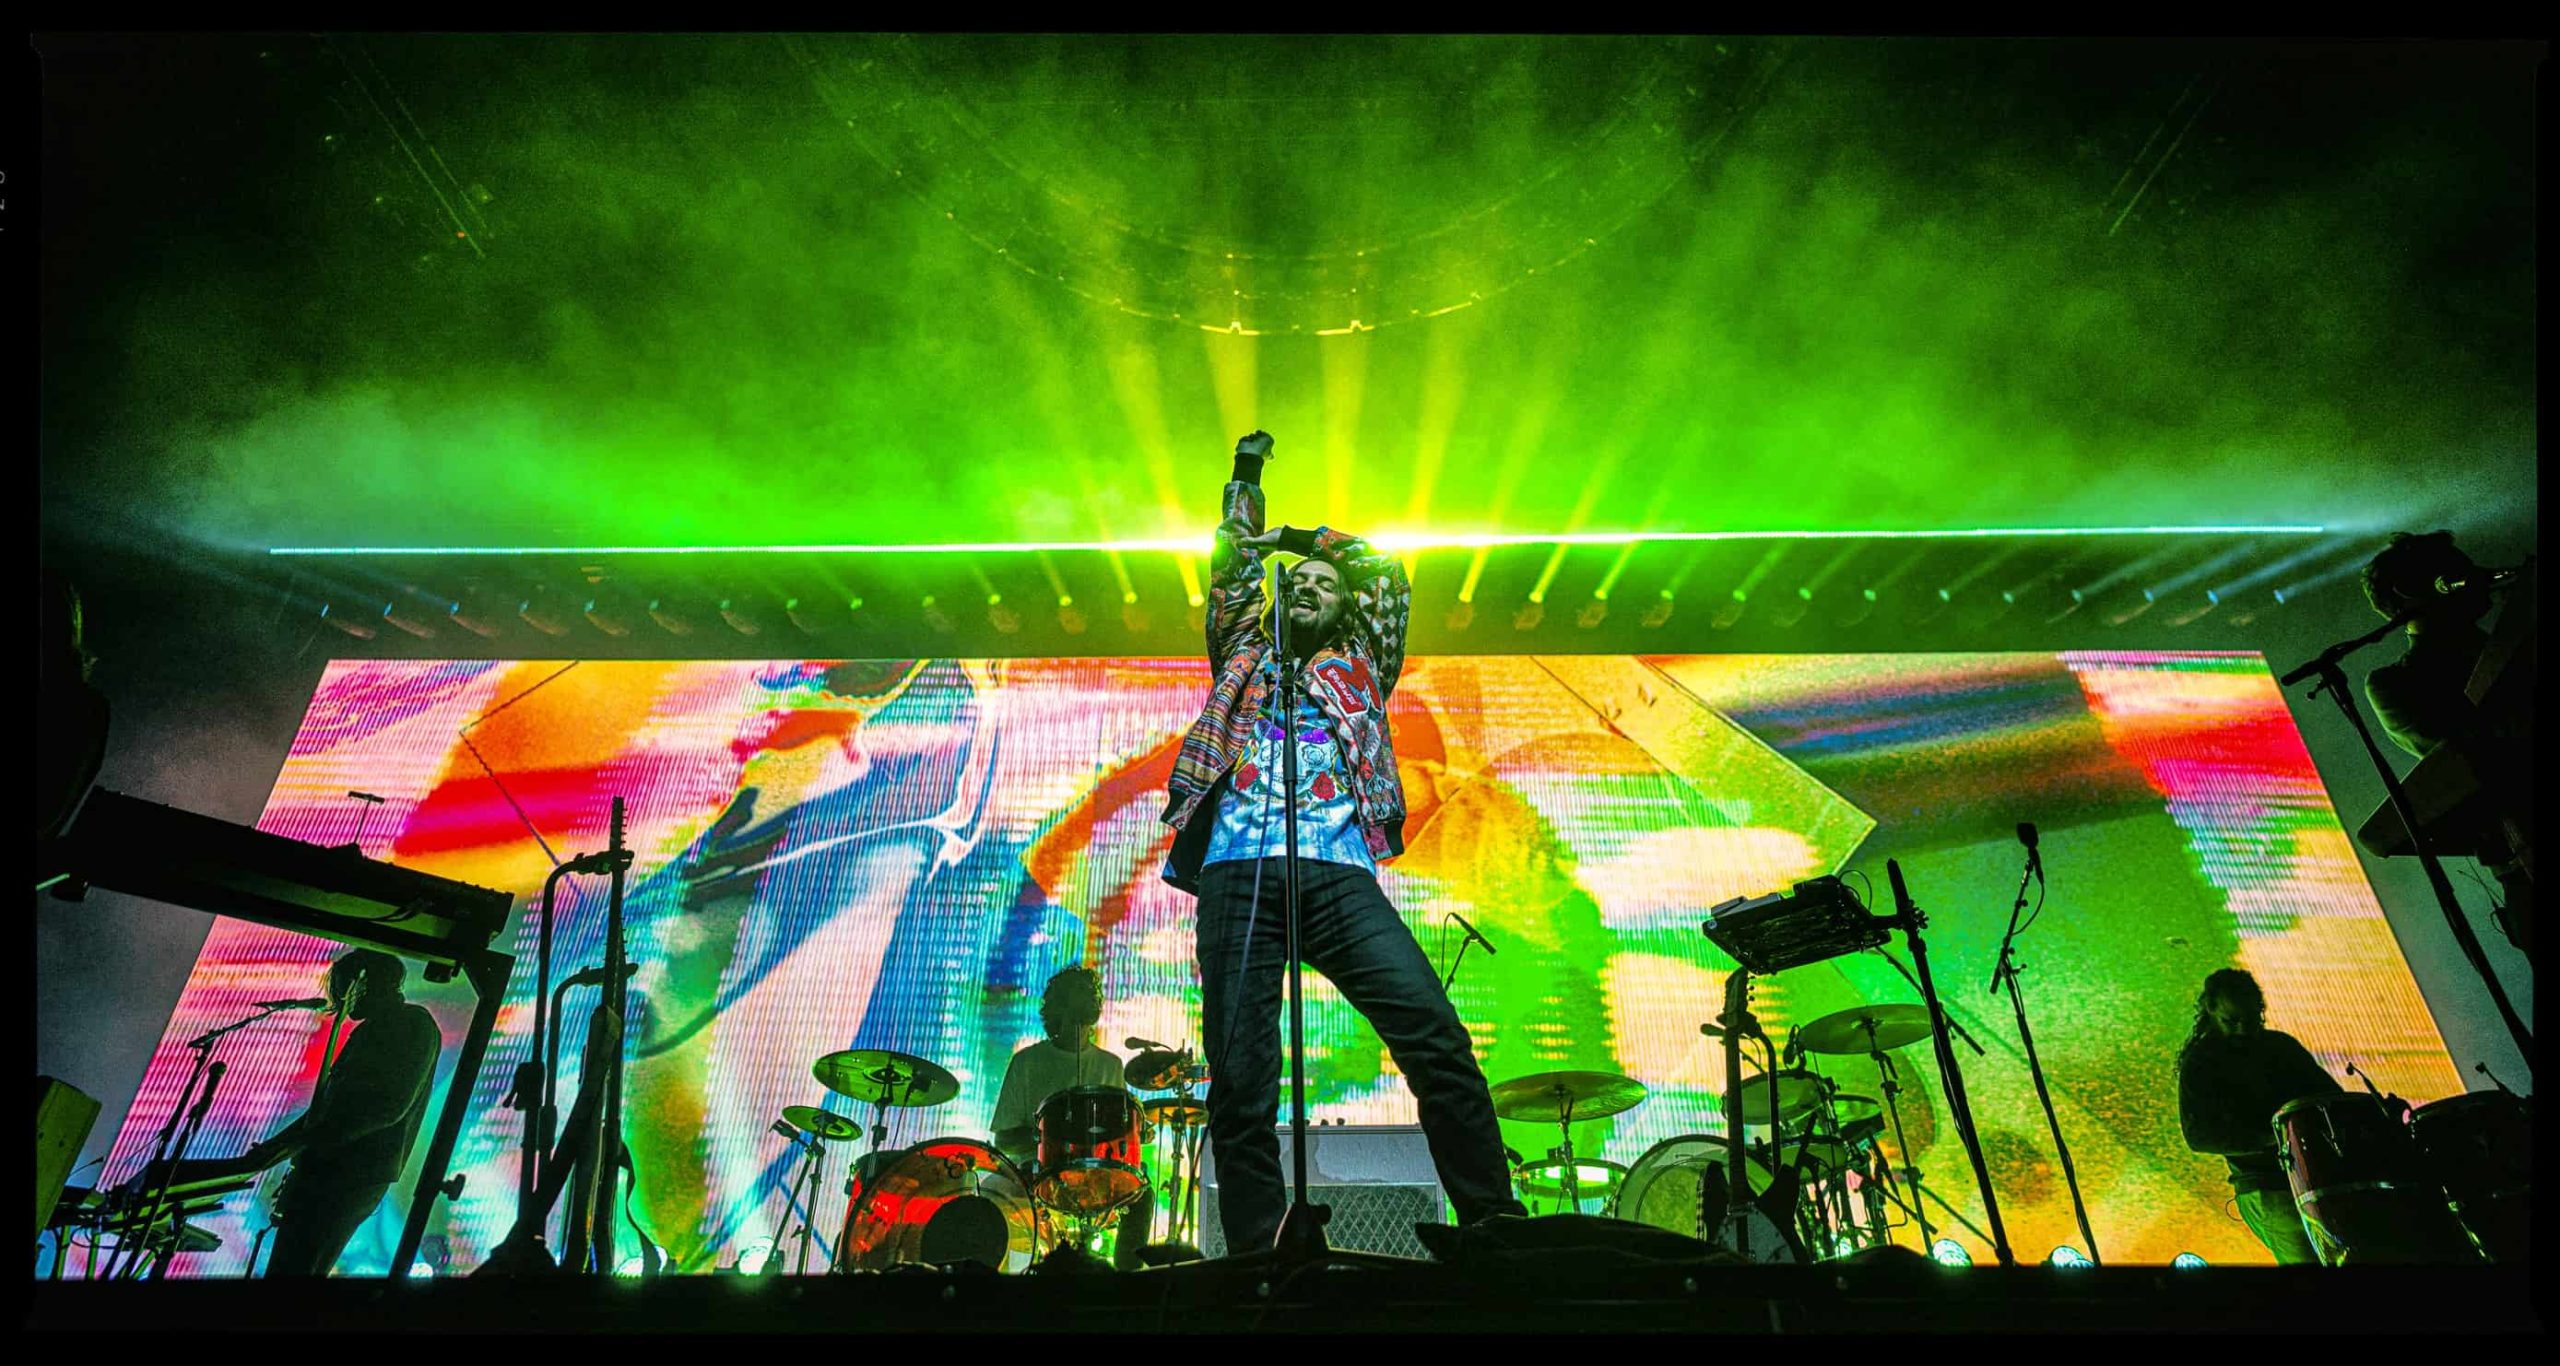 Tame Impala announce tour dates for 2022 along with new track "No Choice": Listen